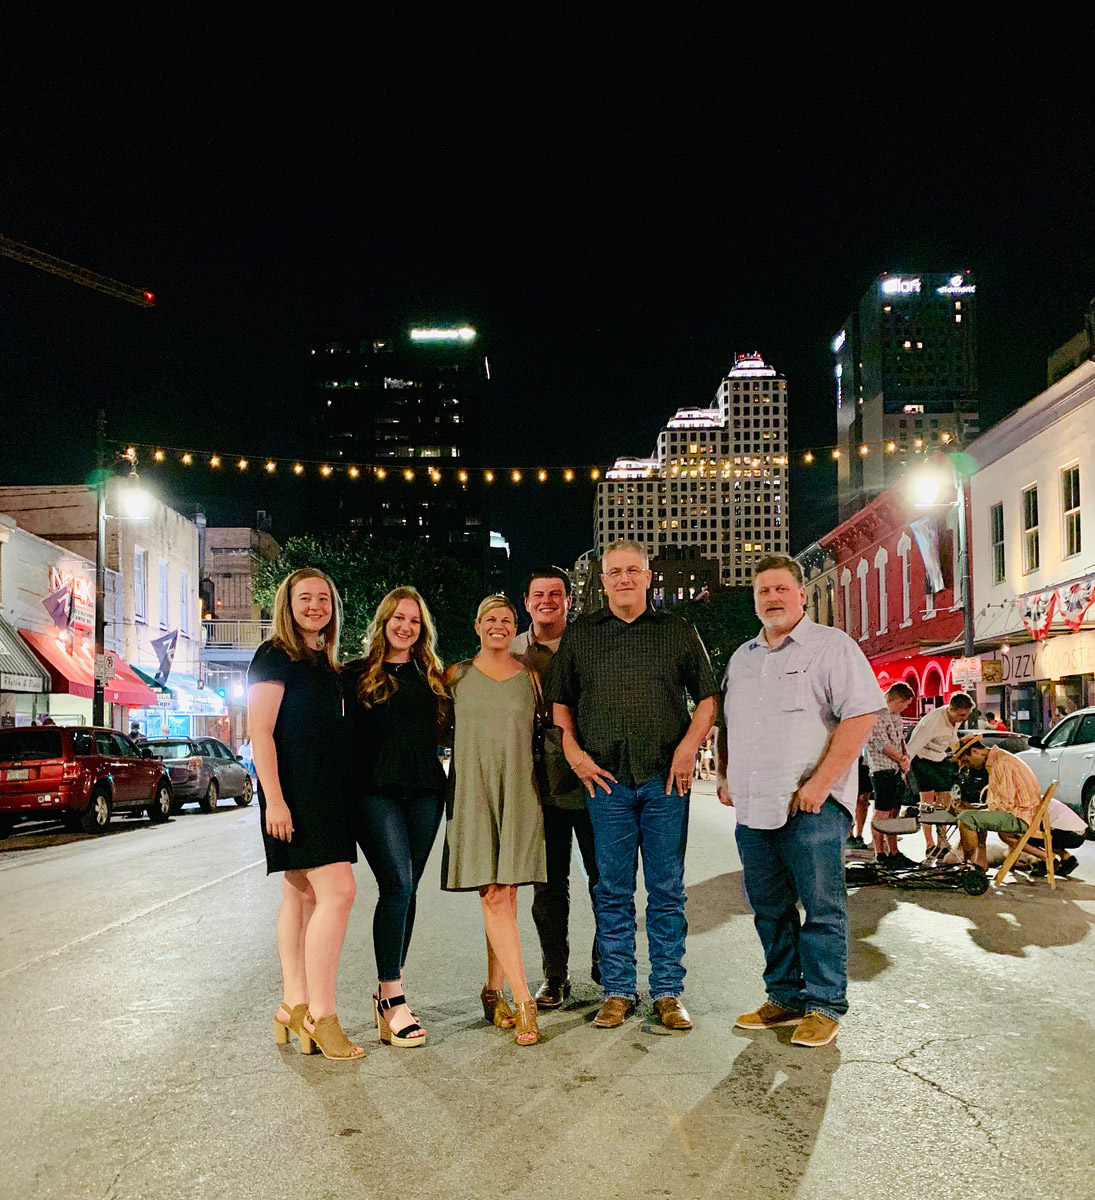  One night, after dining at the Capital Grille, we made it to 6th street.  If you follow me on Snapchat, you noticed.  HELLO!  It was so much fun!  I danced the night away and jammed with the best of Austin! 